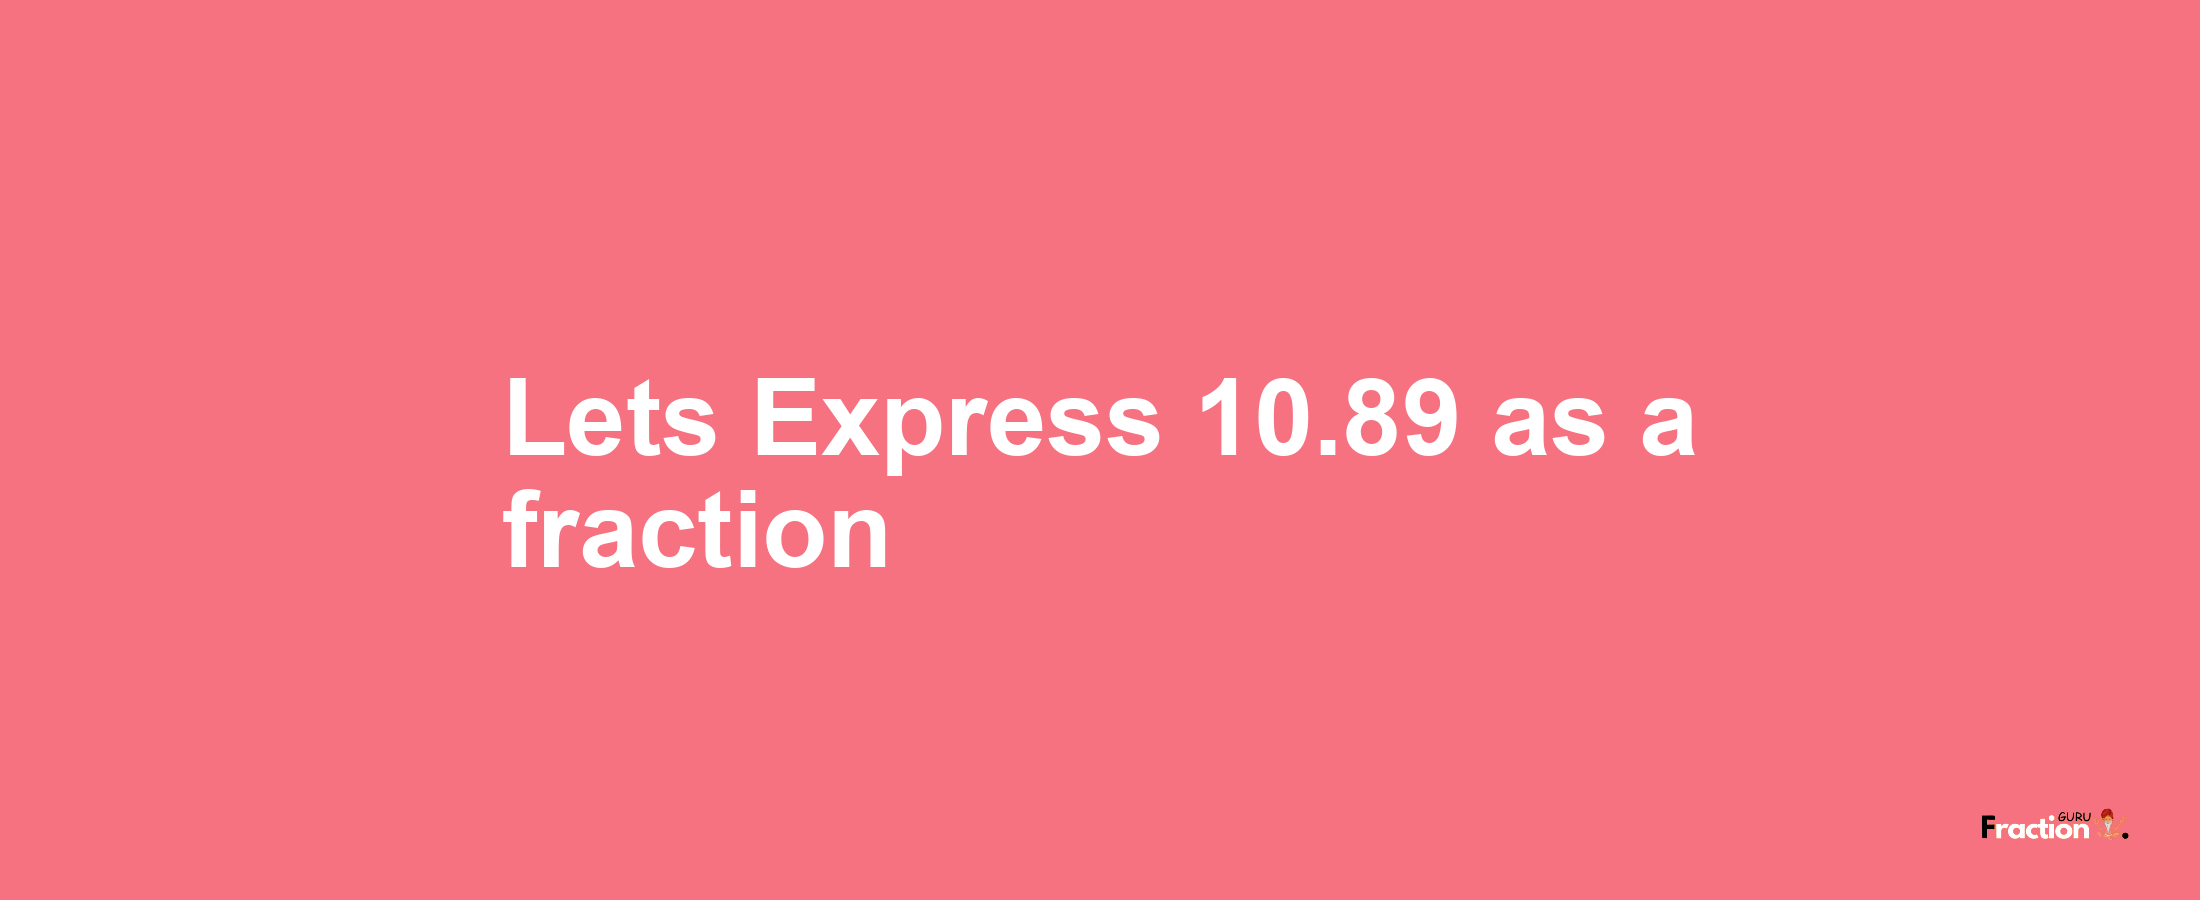 Lets Express 10.89 as afraction